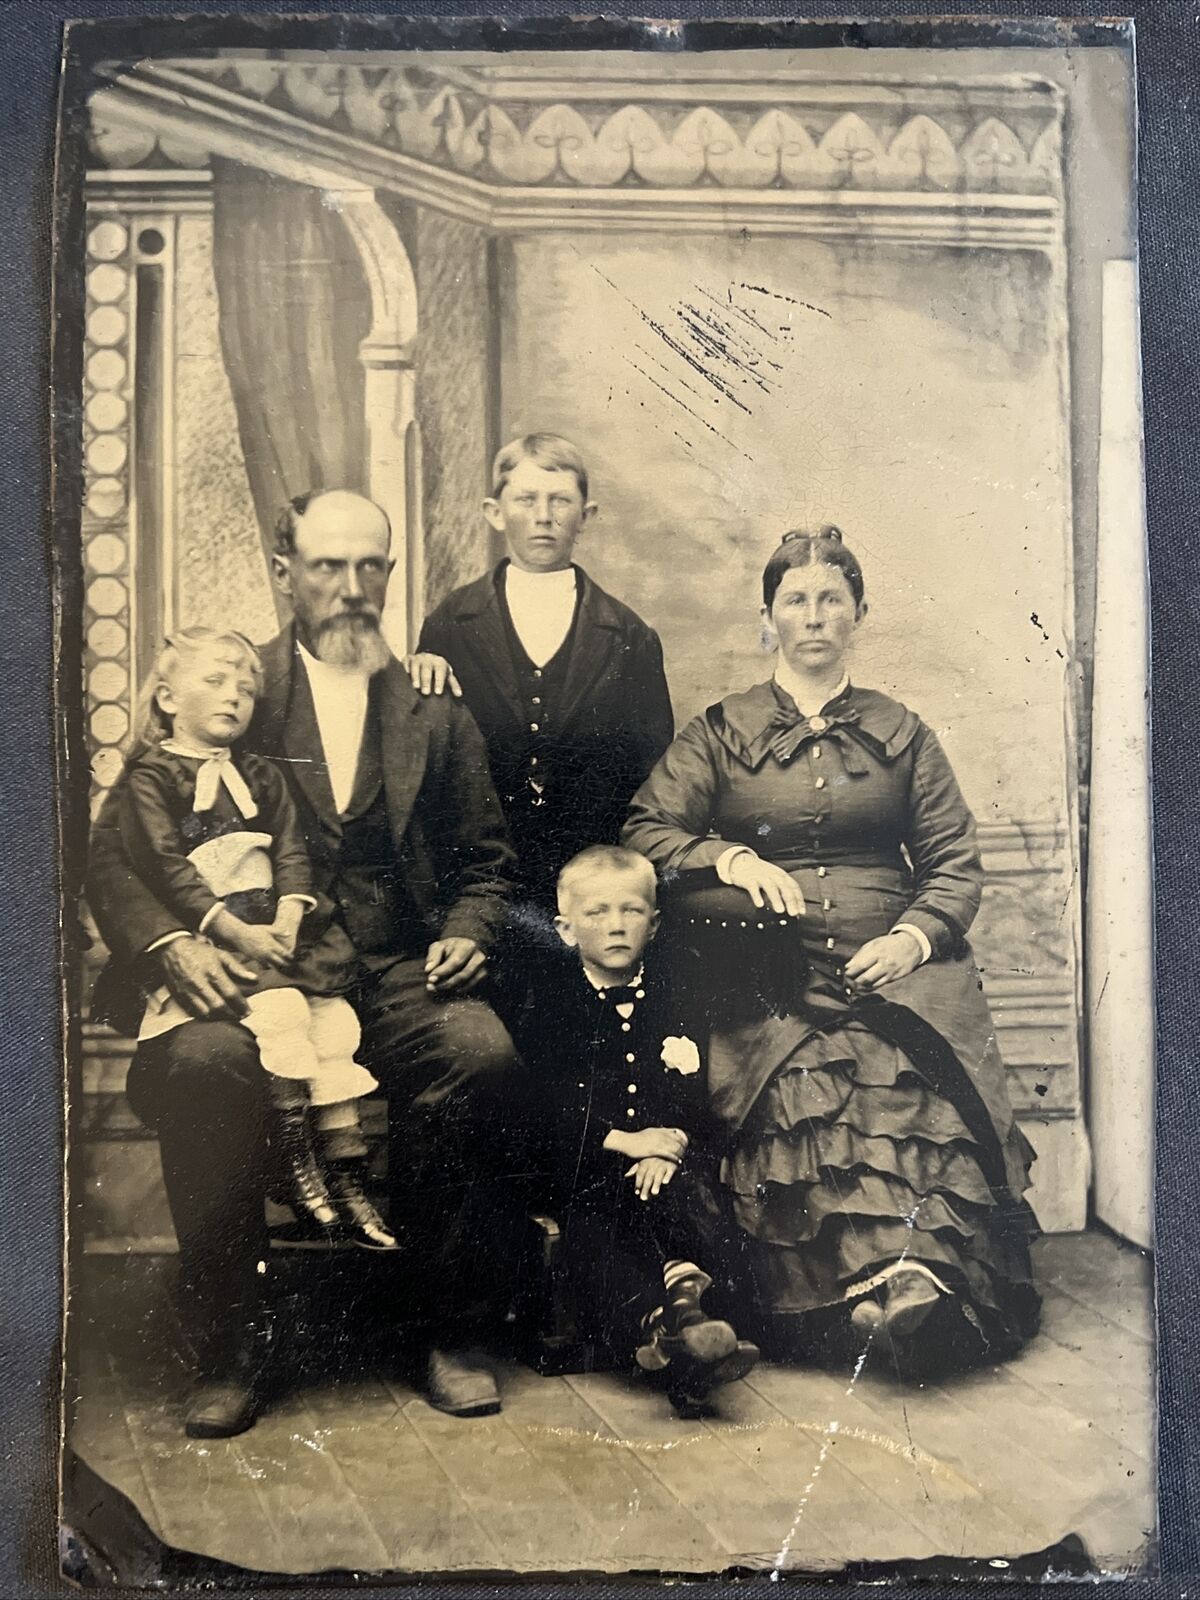 Lovely 1870s Antique Tintype Photo Family of 5 Group Portrait large 5x7 Tin Type